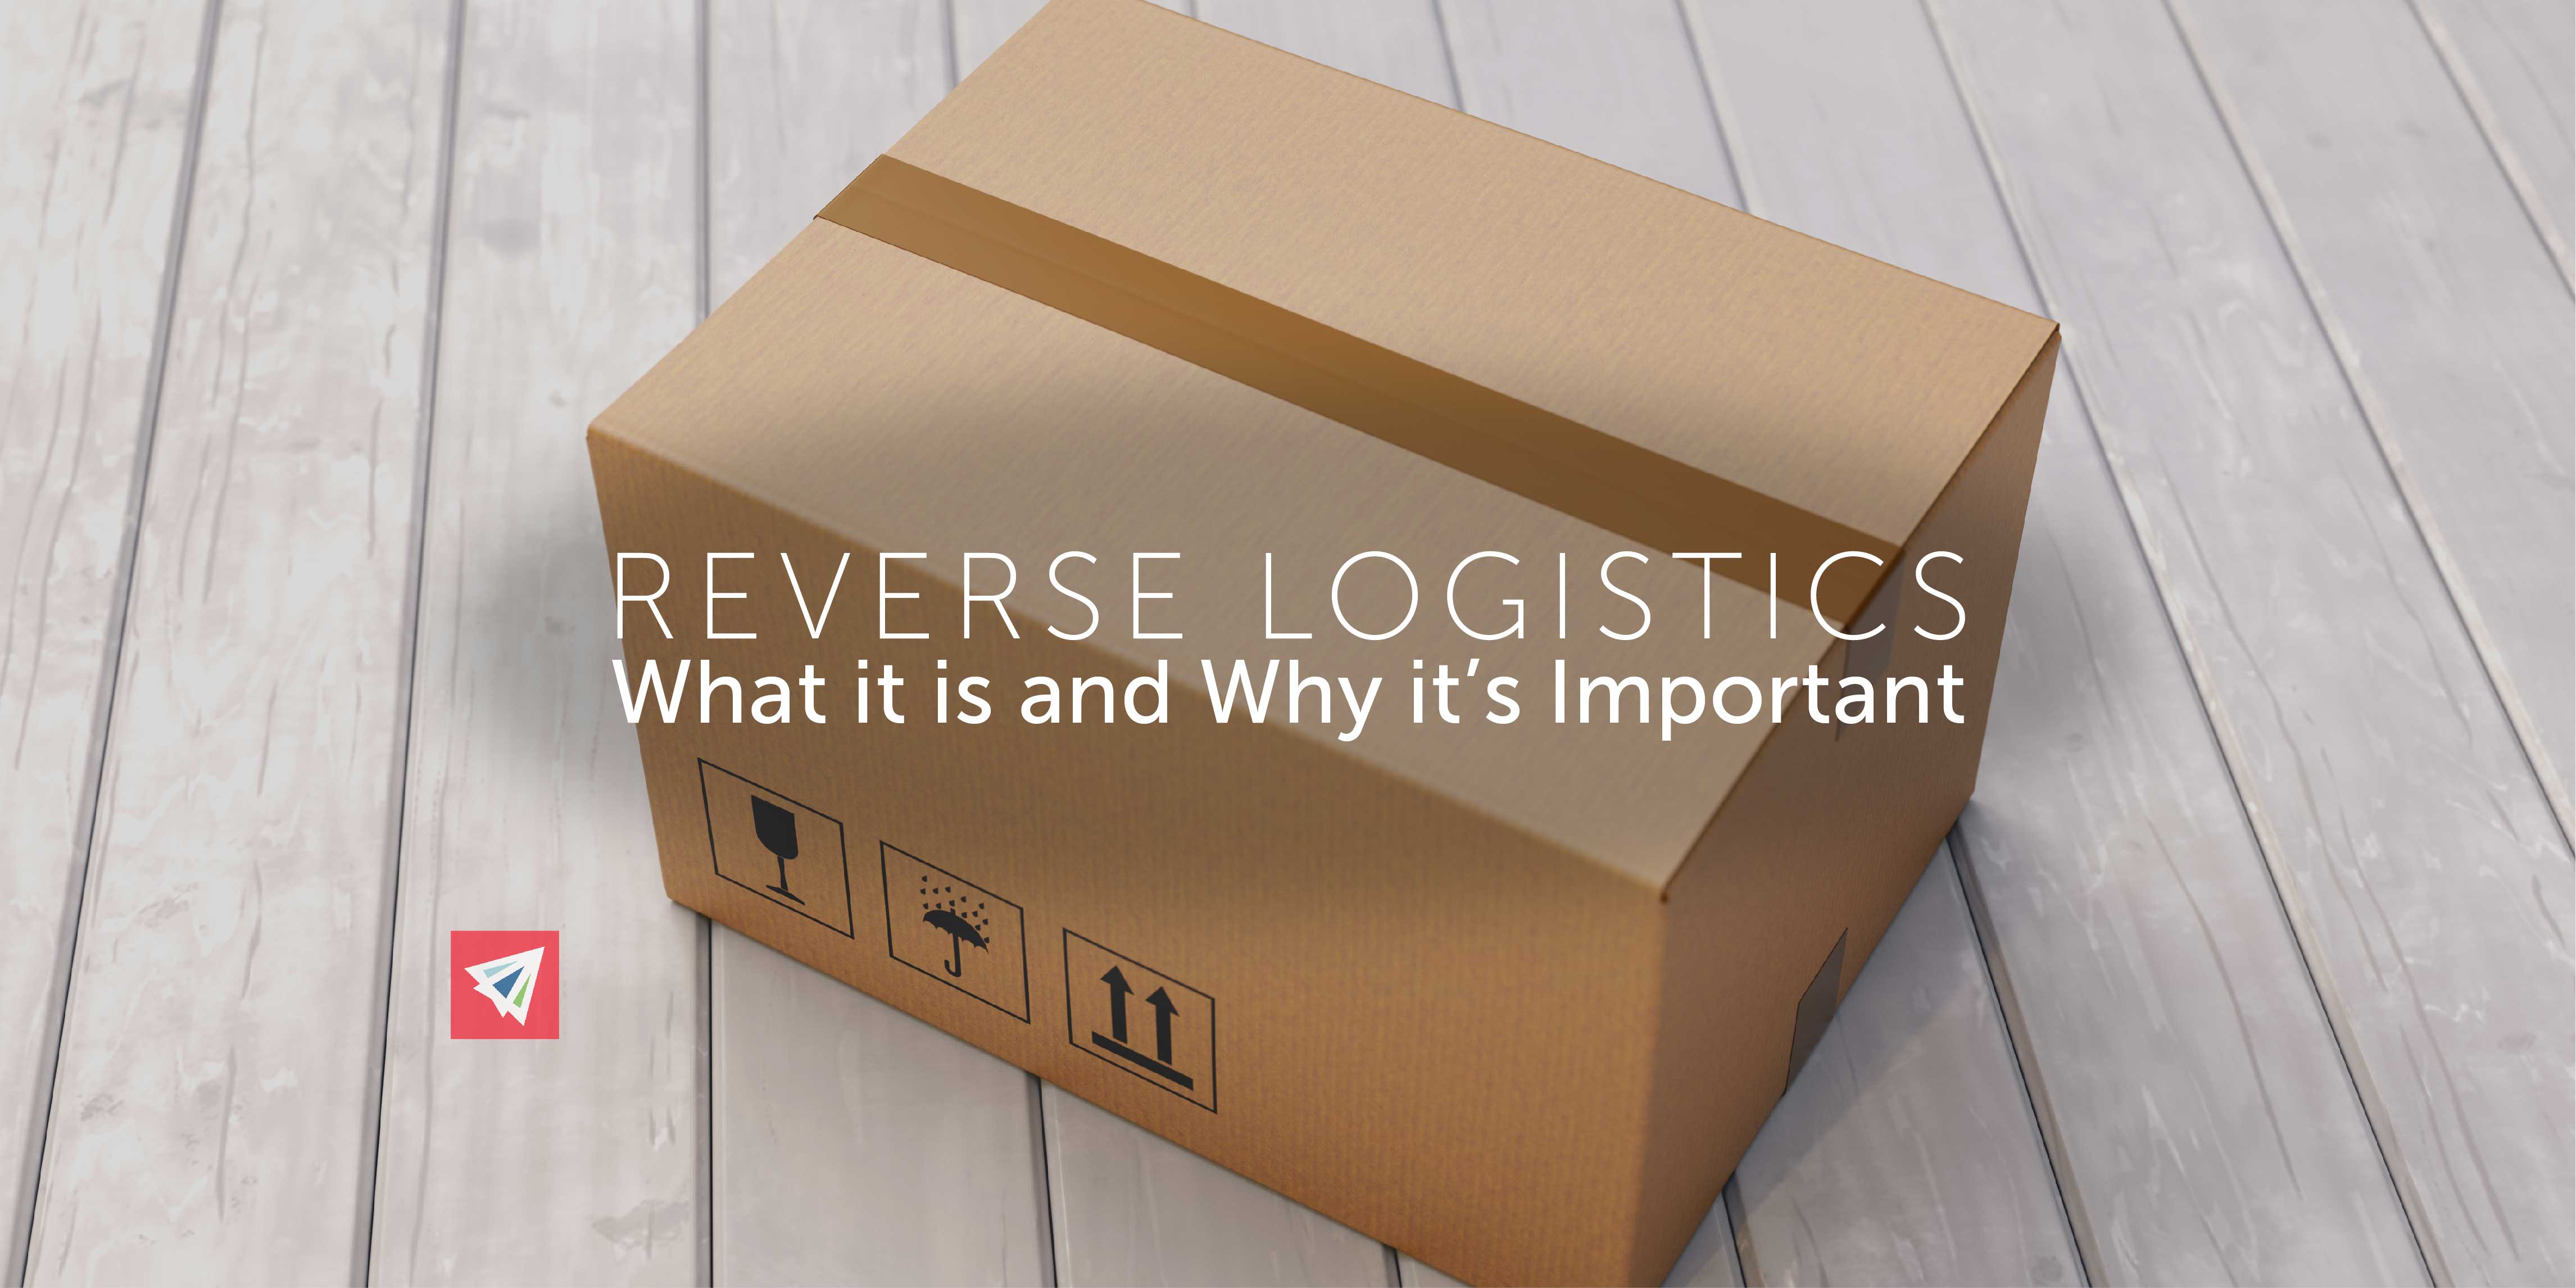 Reverse Logistics: What is it and Why is it Important?